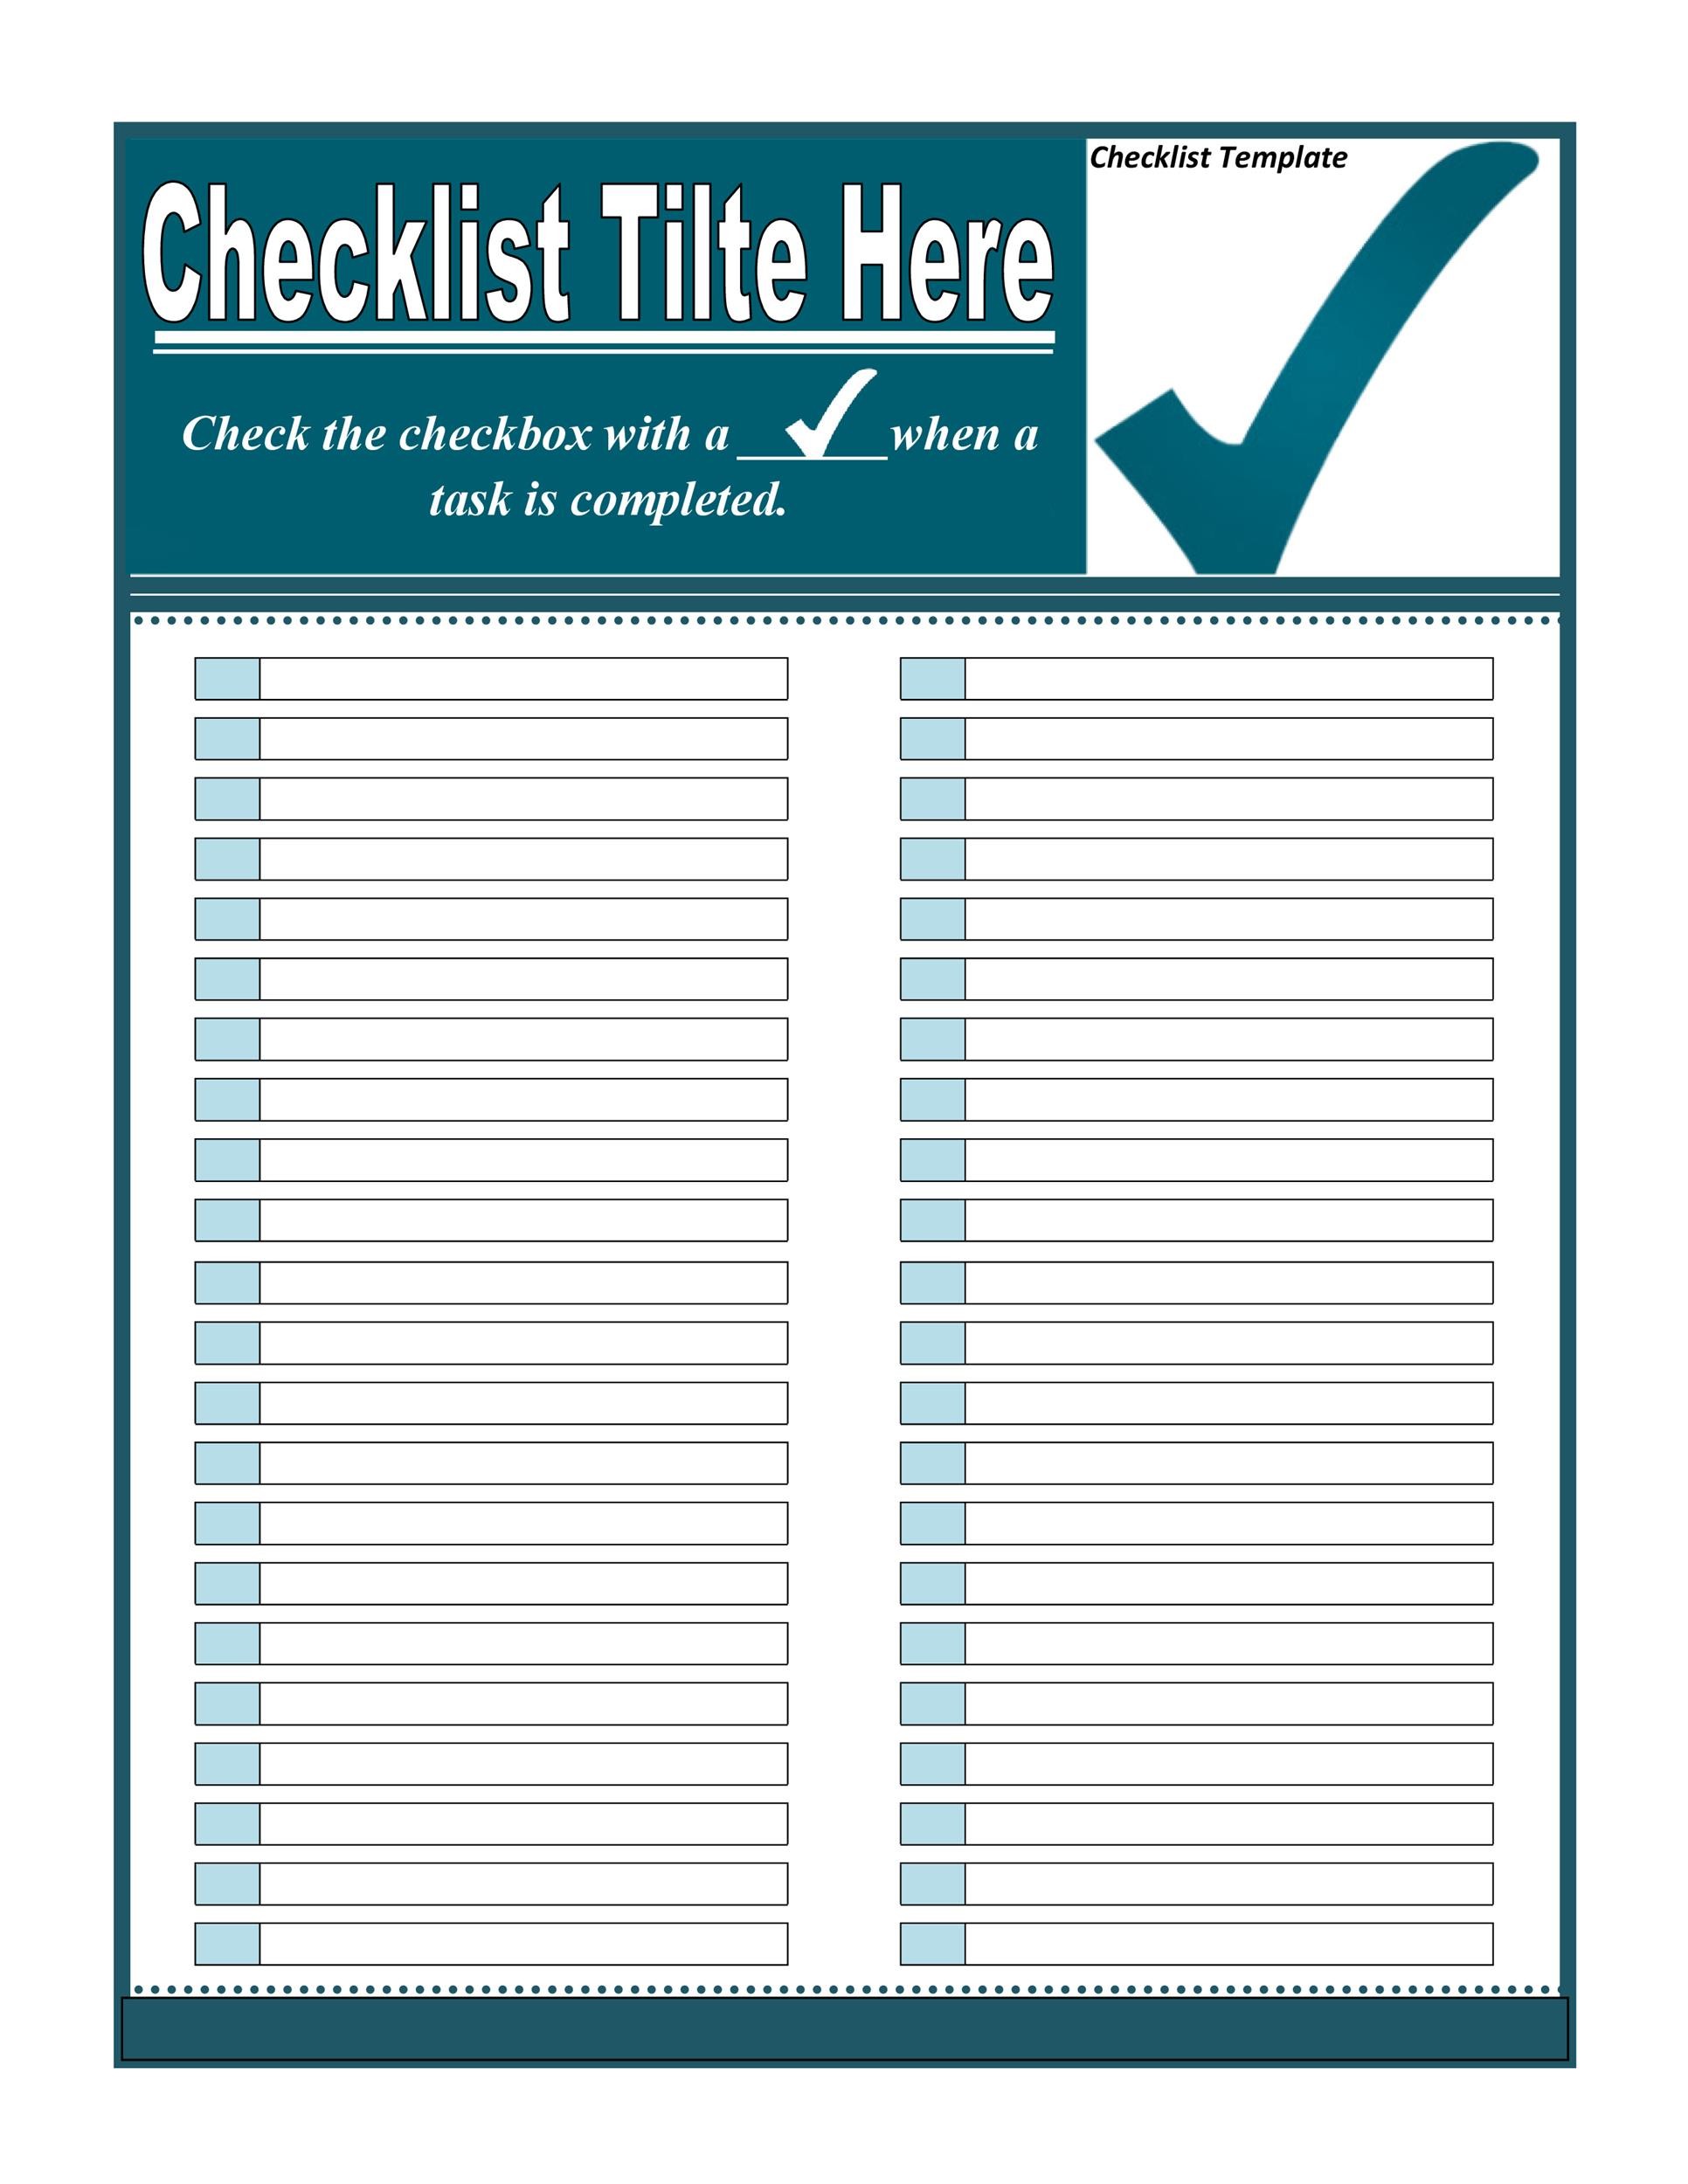 Does Microsoft Word Have A Checklist Template